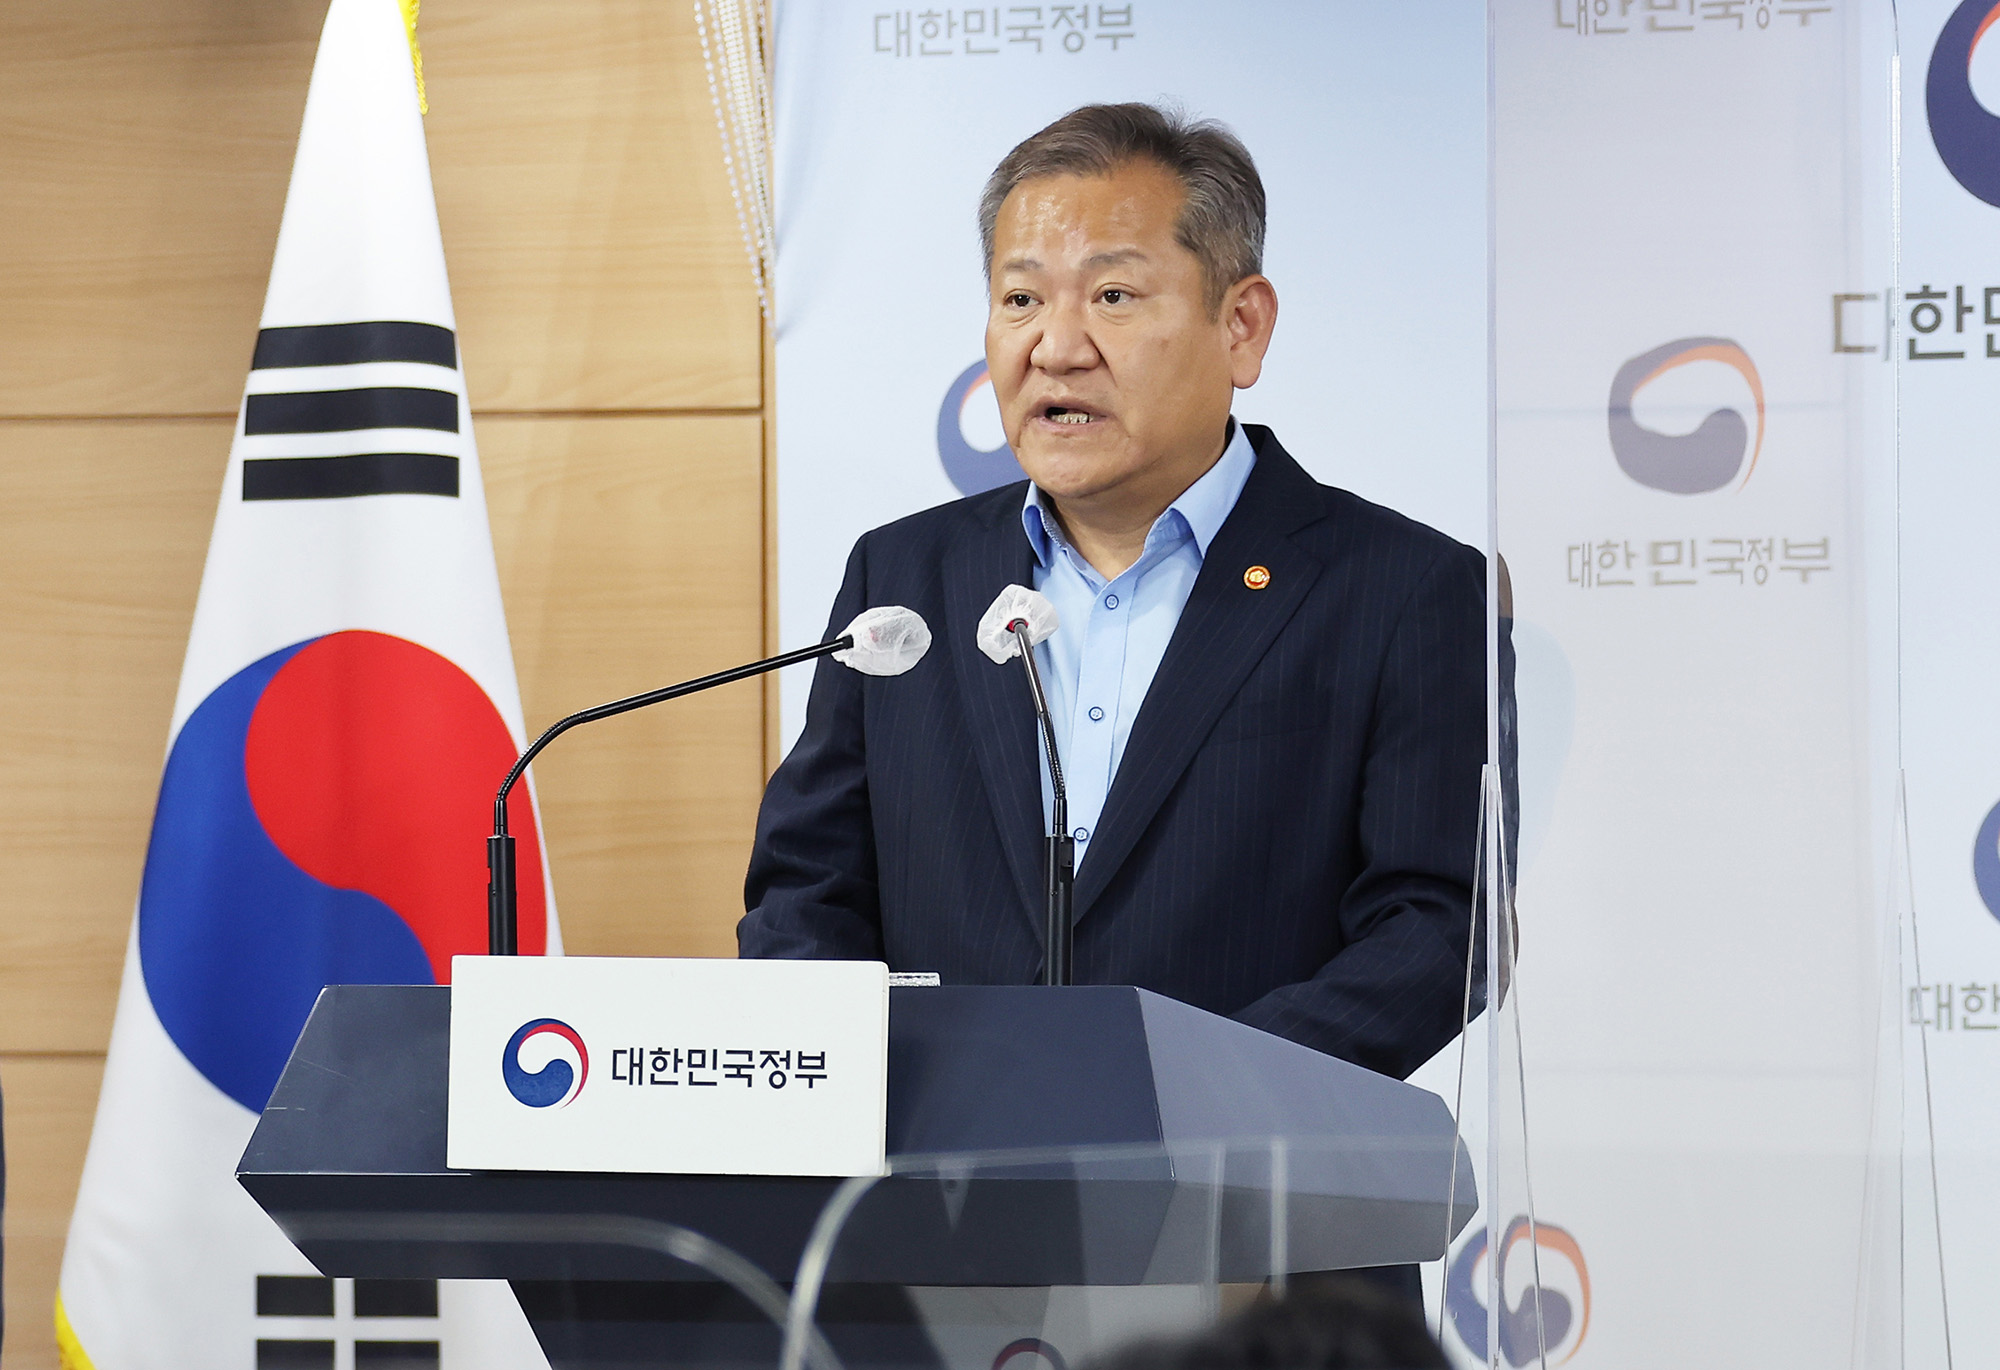 Lee Sang-min, Minister of the Interior and Safety speaks during a press conference at the government complex in Seoul on Thursday, Oct. 6.